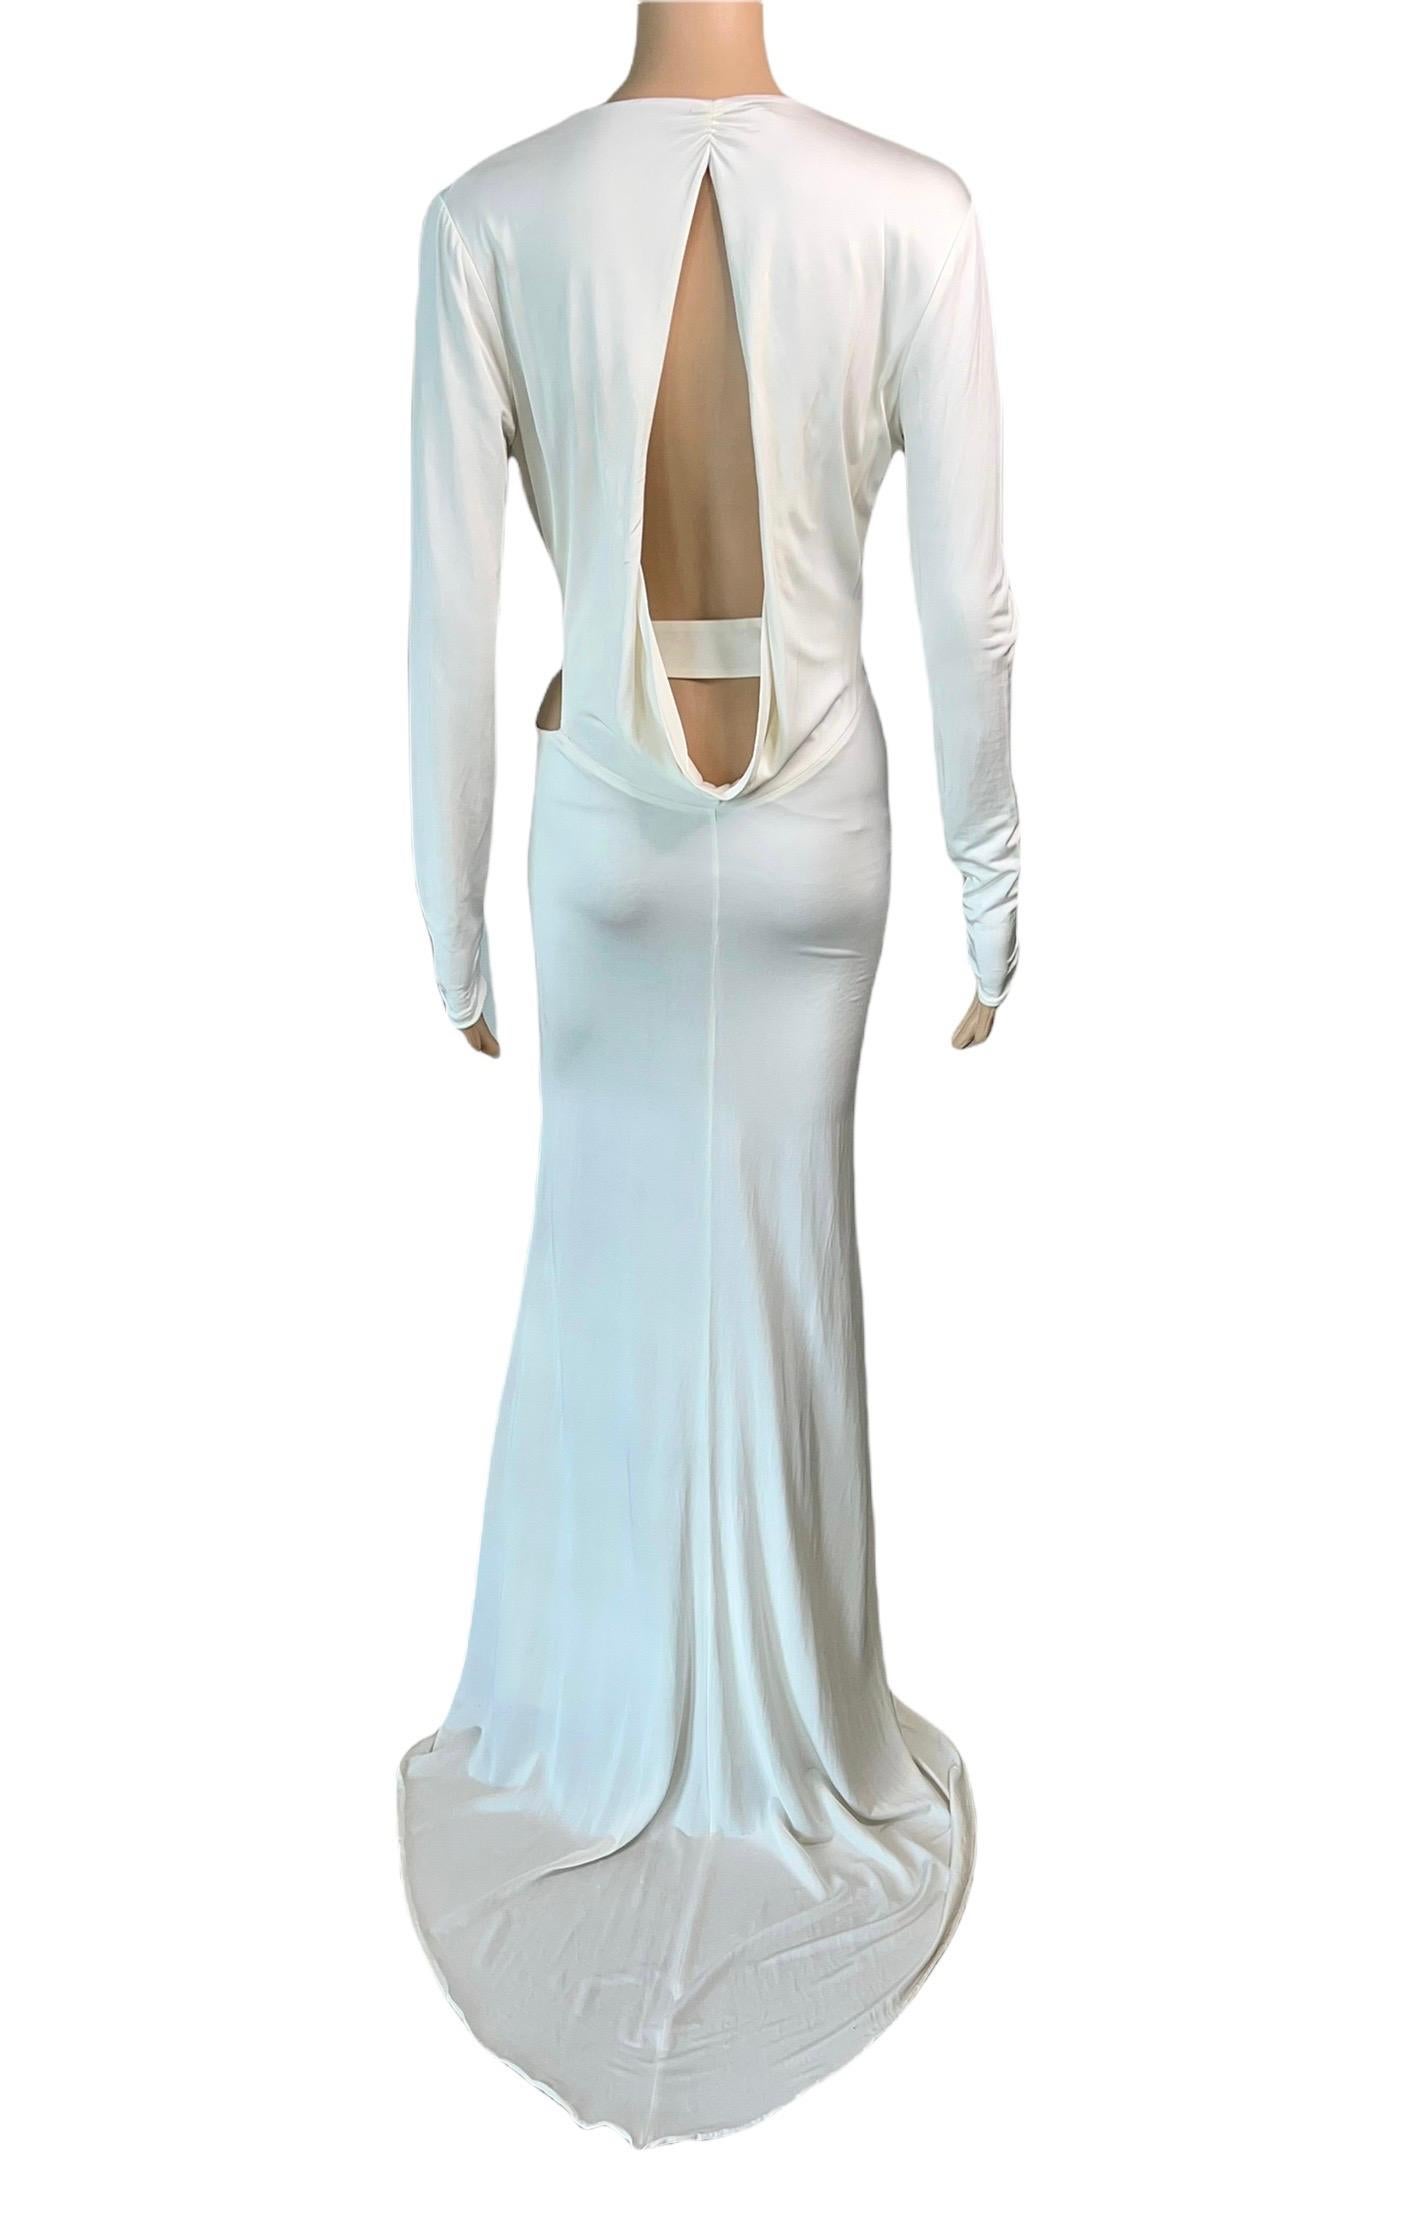 Tom Ford for Gucci F/W 2004 Runway Plunging Cutout Ivory Evening Dress Gown For Sale 1